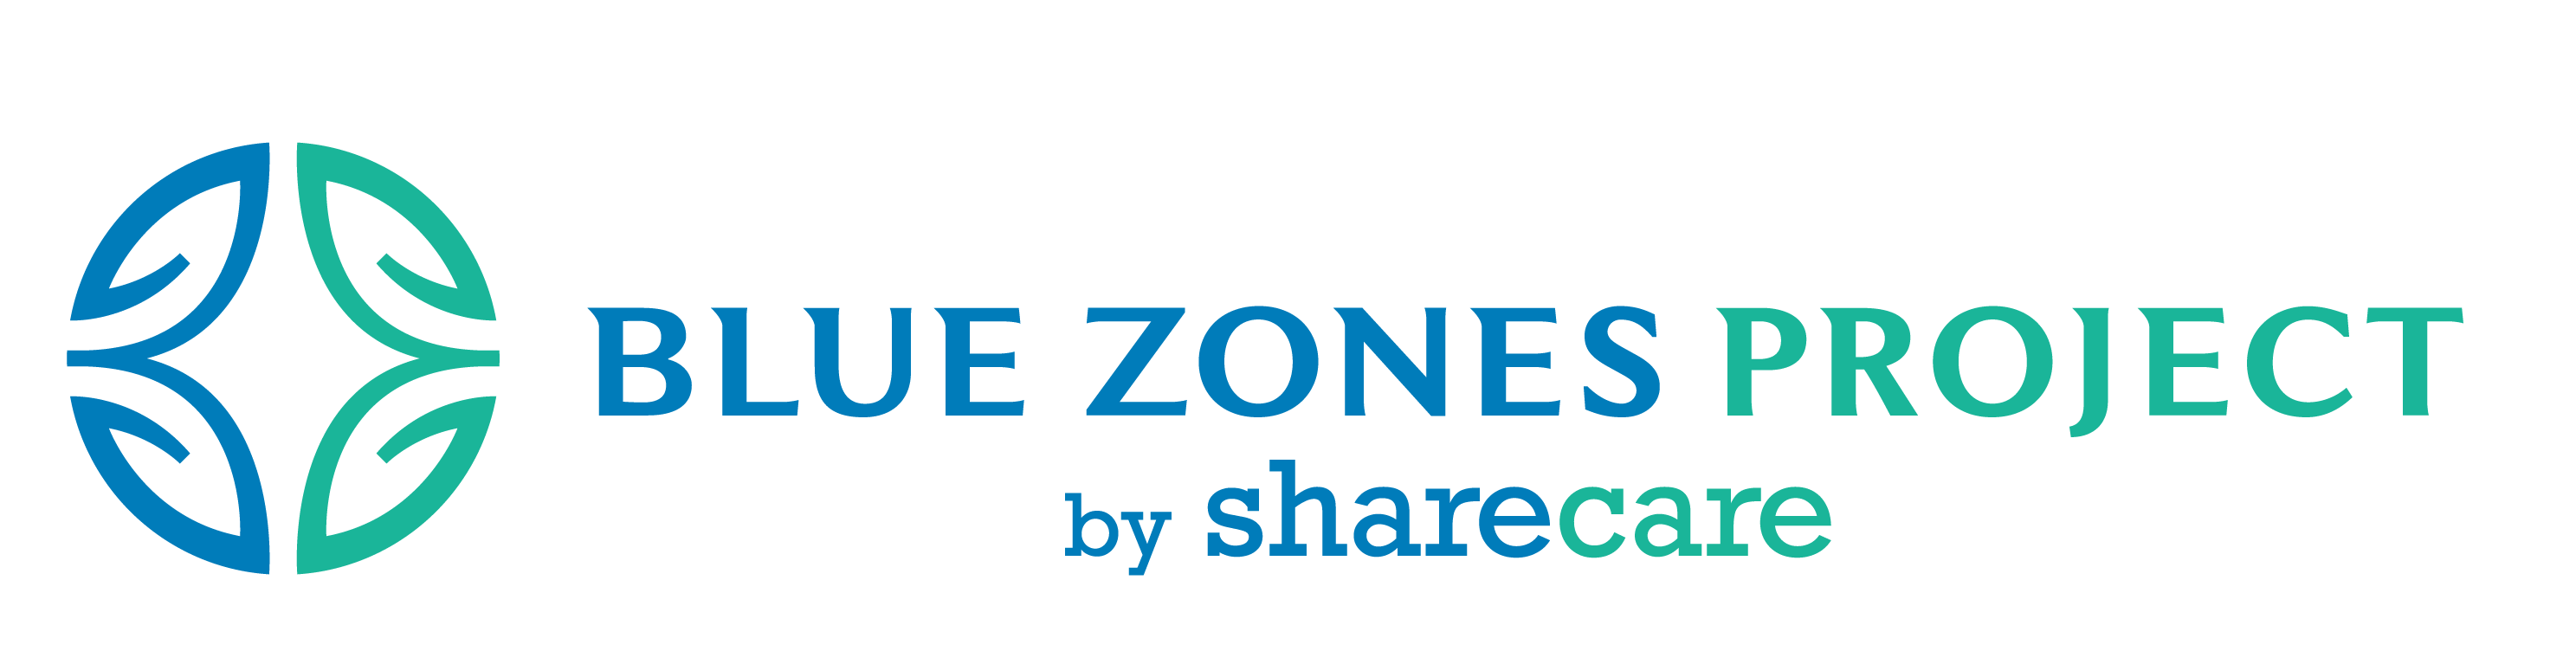 Blue Zones Project by Sharecare logo